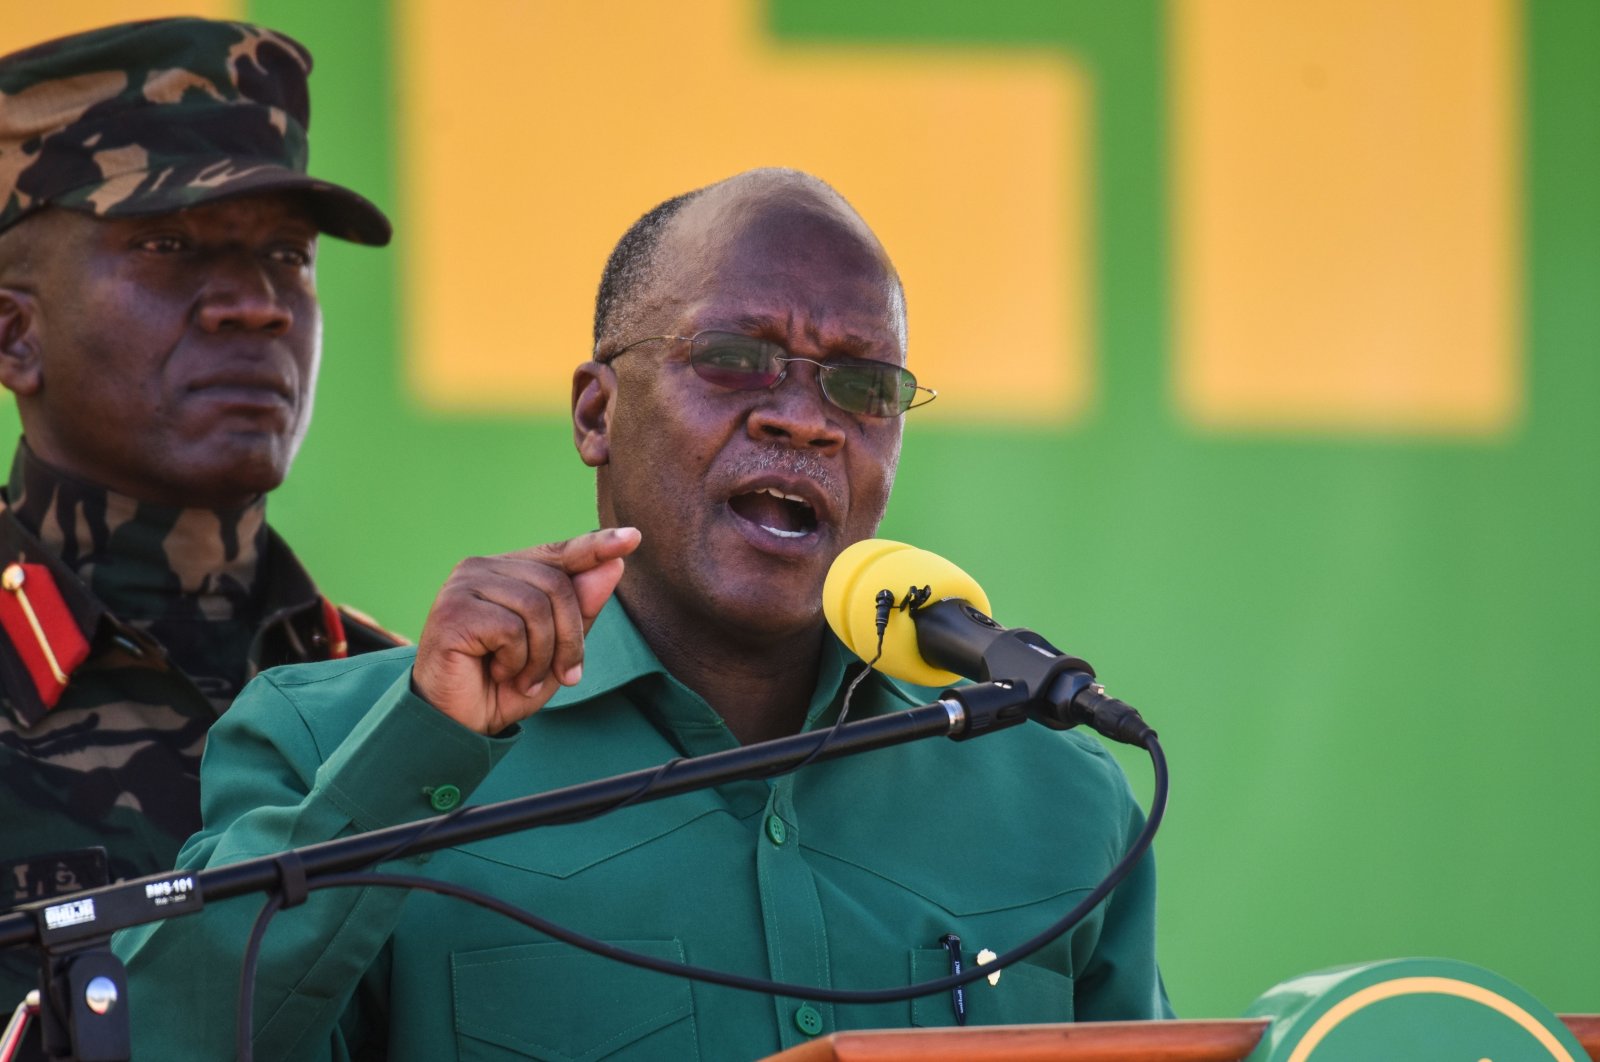 Tanzania's incumbent President and presidential candidate of ruling party Chama Cha Mapinduzi (CCM) John Magufuli (R) speaks during the official launch of the party's campaign for the October general election at the Jamhuri stadium in Dodoma, Tanzania, on Aug. 29, 2020. (AFP Photo)